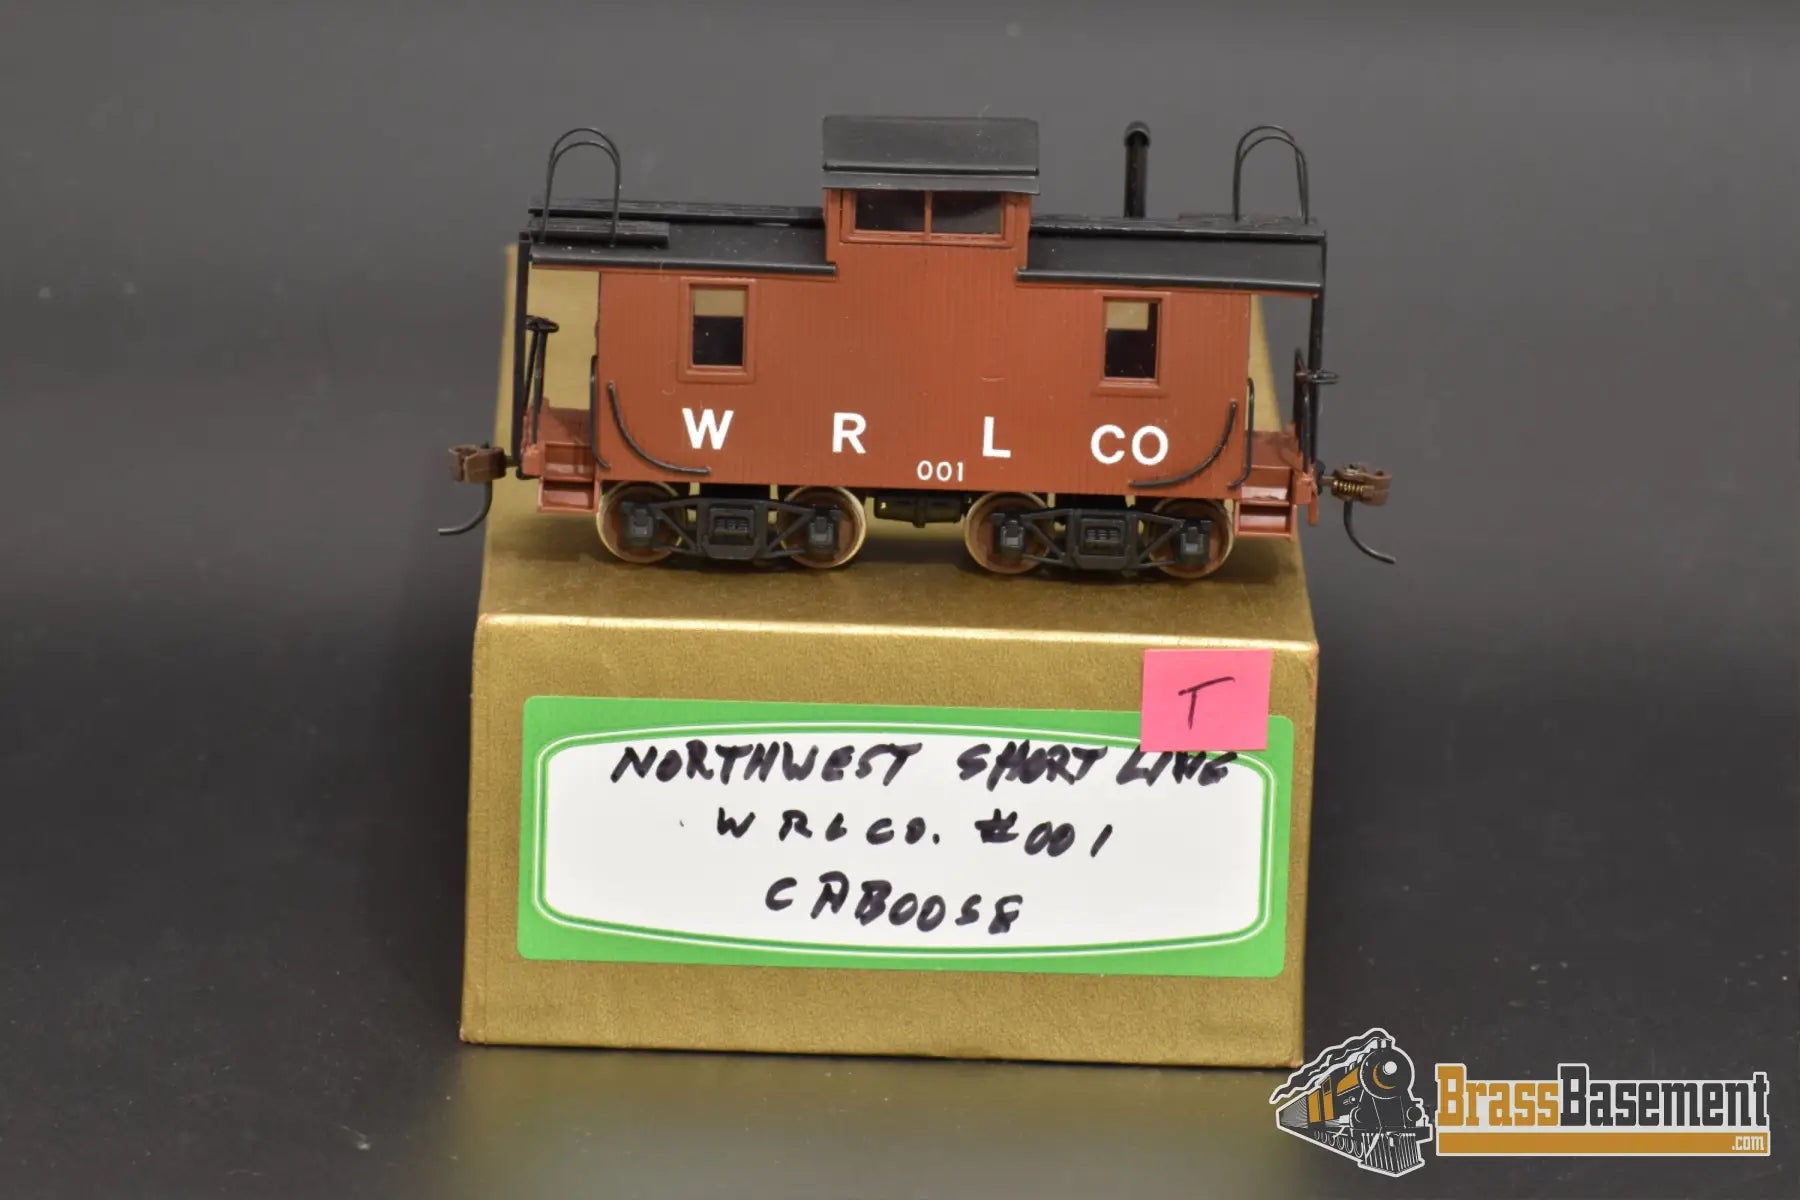 Ho Brass - Nwsl White River Lumber Co. Caboose #001 Pro Custom Paint